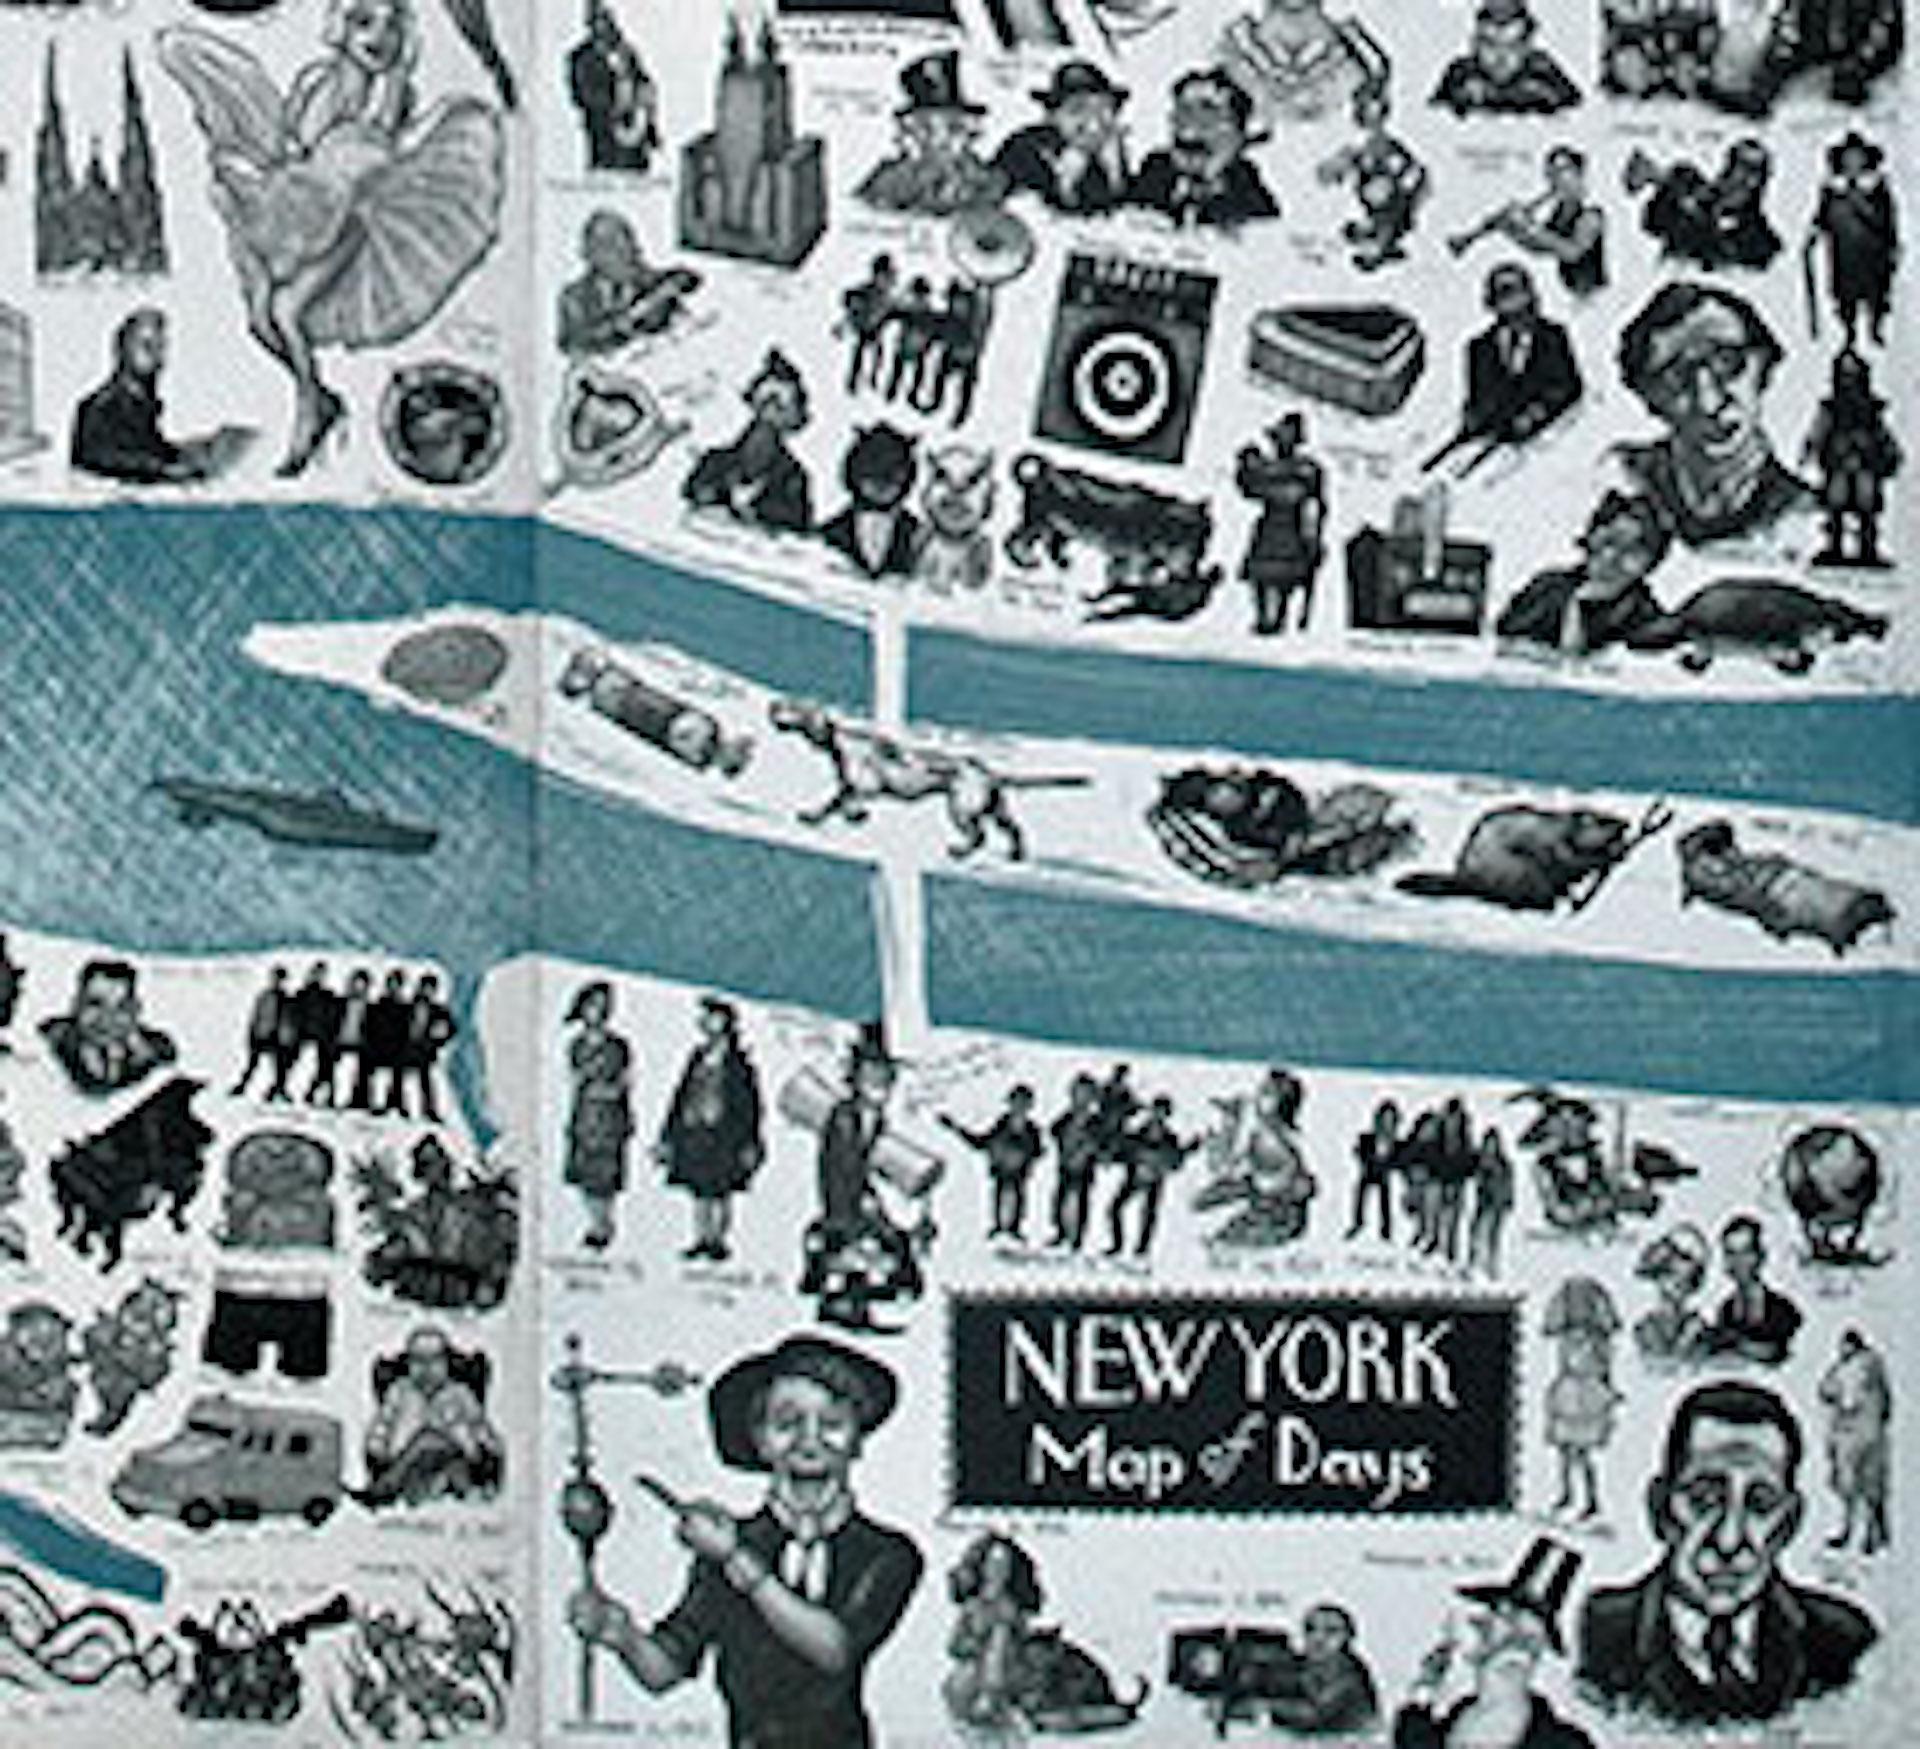 New York Map of Days is a limited edition etching by Mychael Barratt. The illustrative style of this piece brings New York, it’s landmarks and endless stories to life.

Etching – A relief printing technique whereby the inverse image is scratched